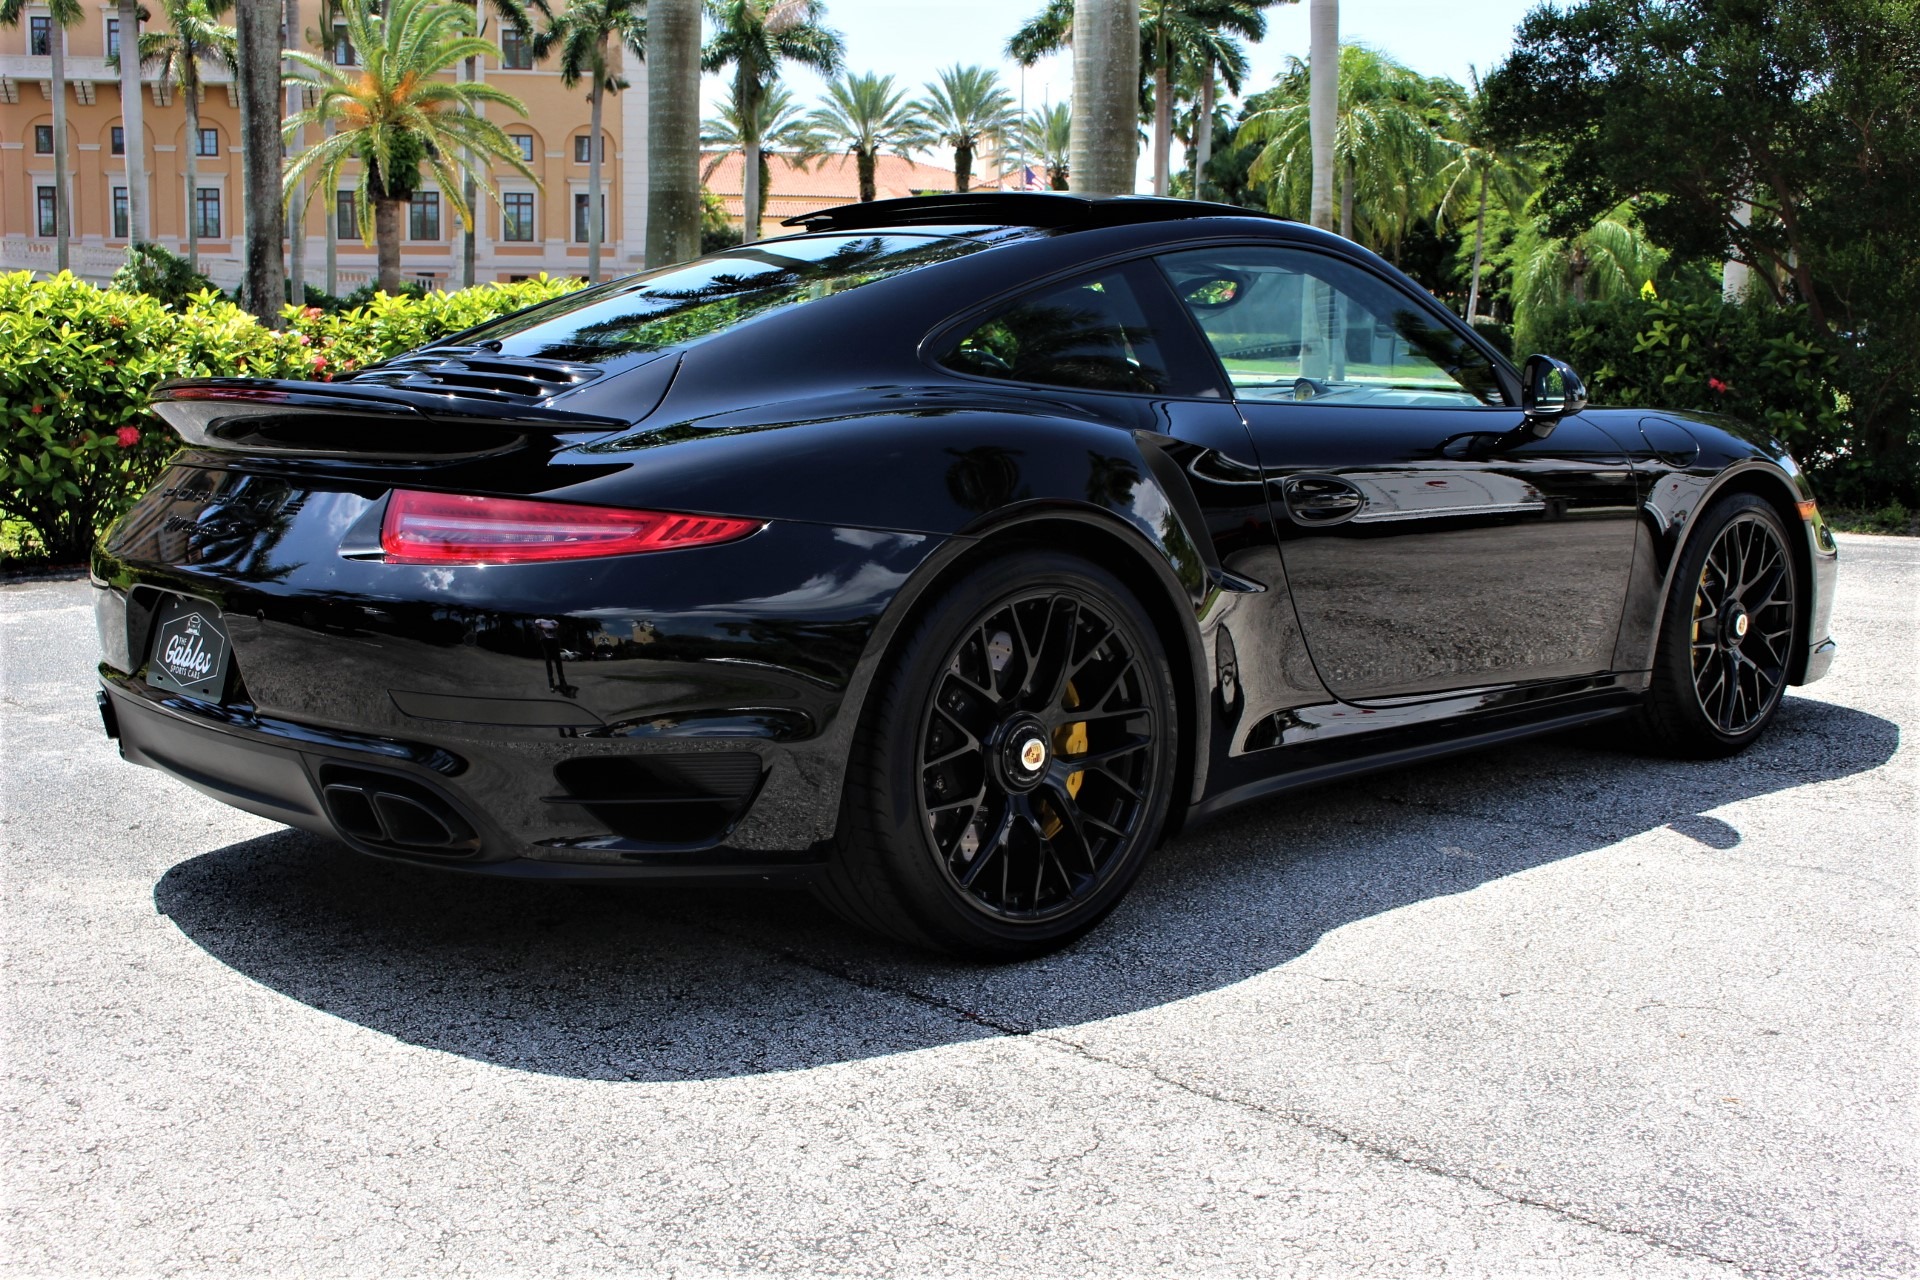 Used 2014 Porsche 911 Turbo S for sale Sold at The Gables Sports Cars in Miami FL 33146 4